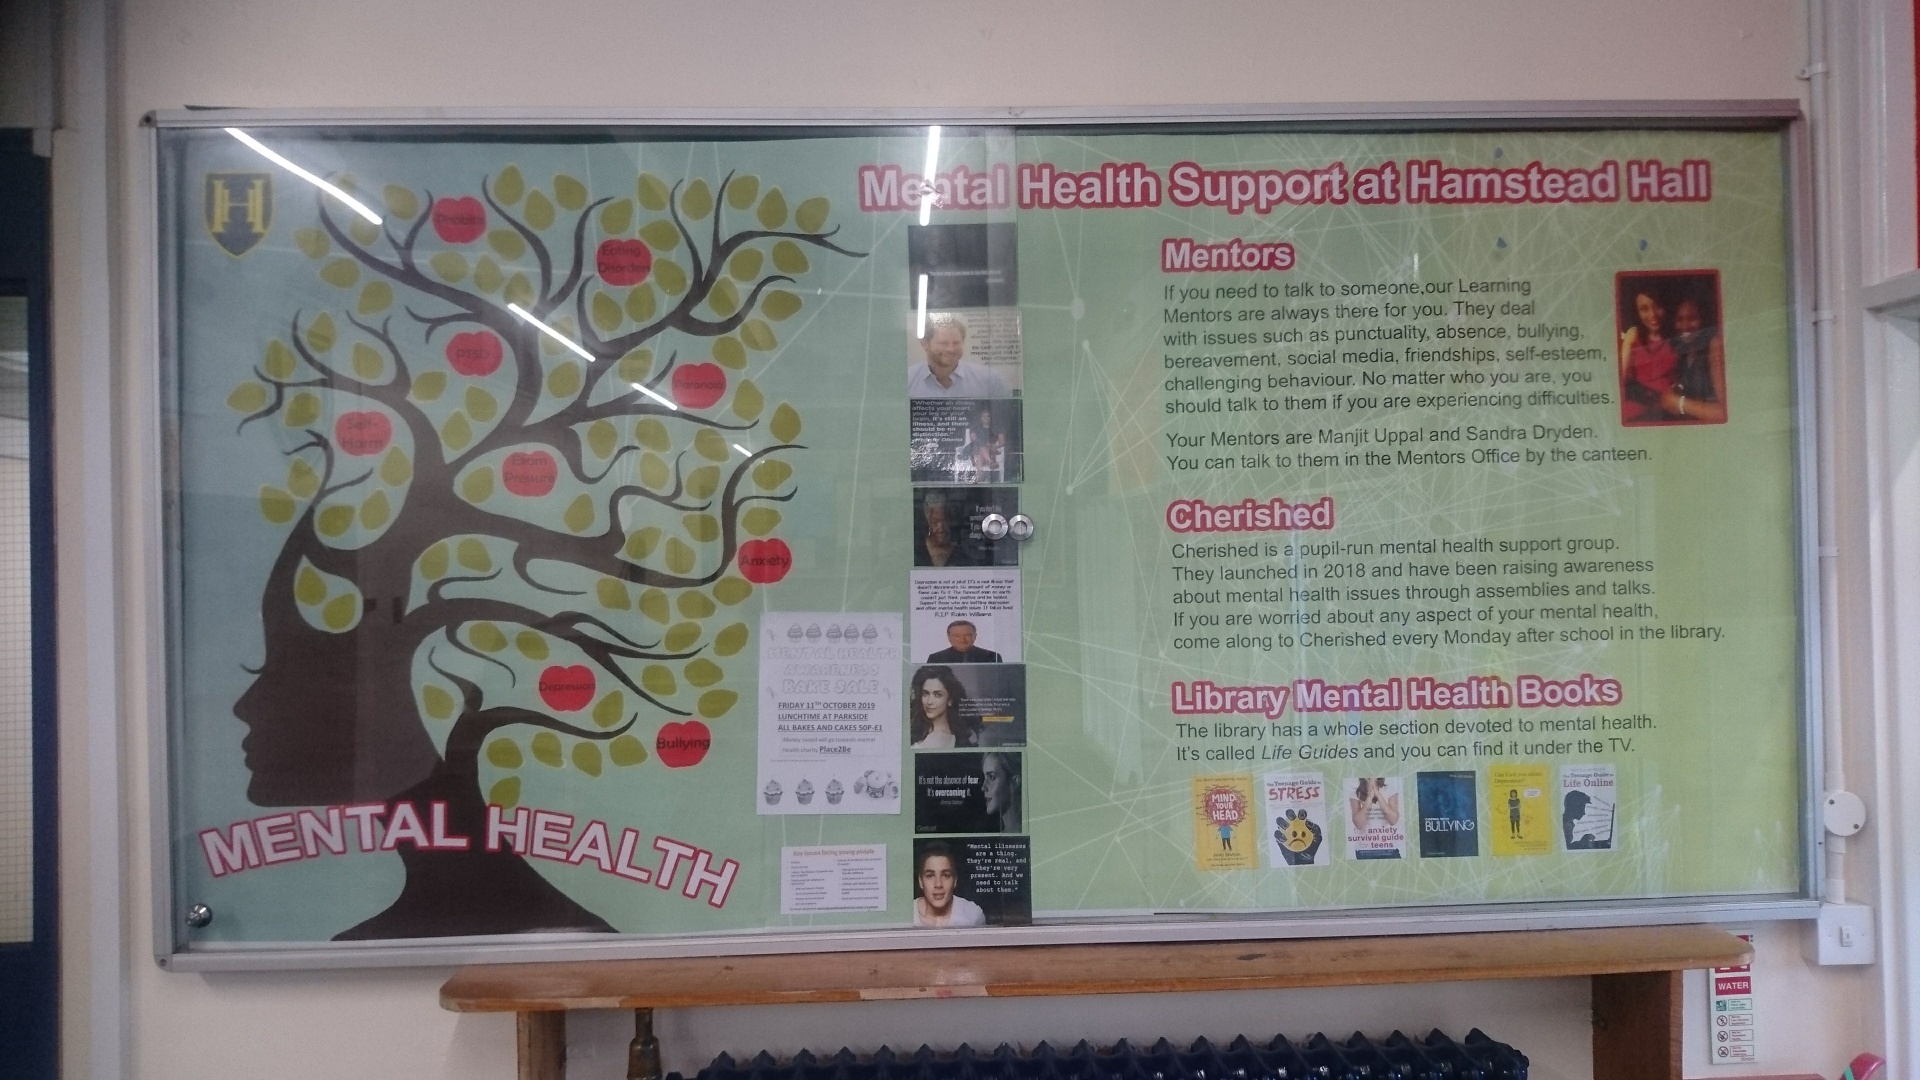 This display in the Parkside building was designed by the Cherished Group.